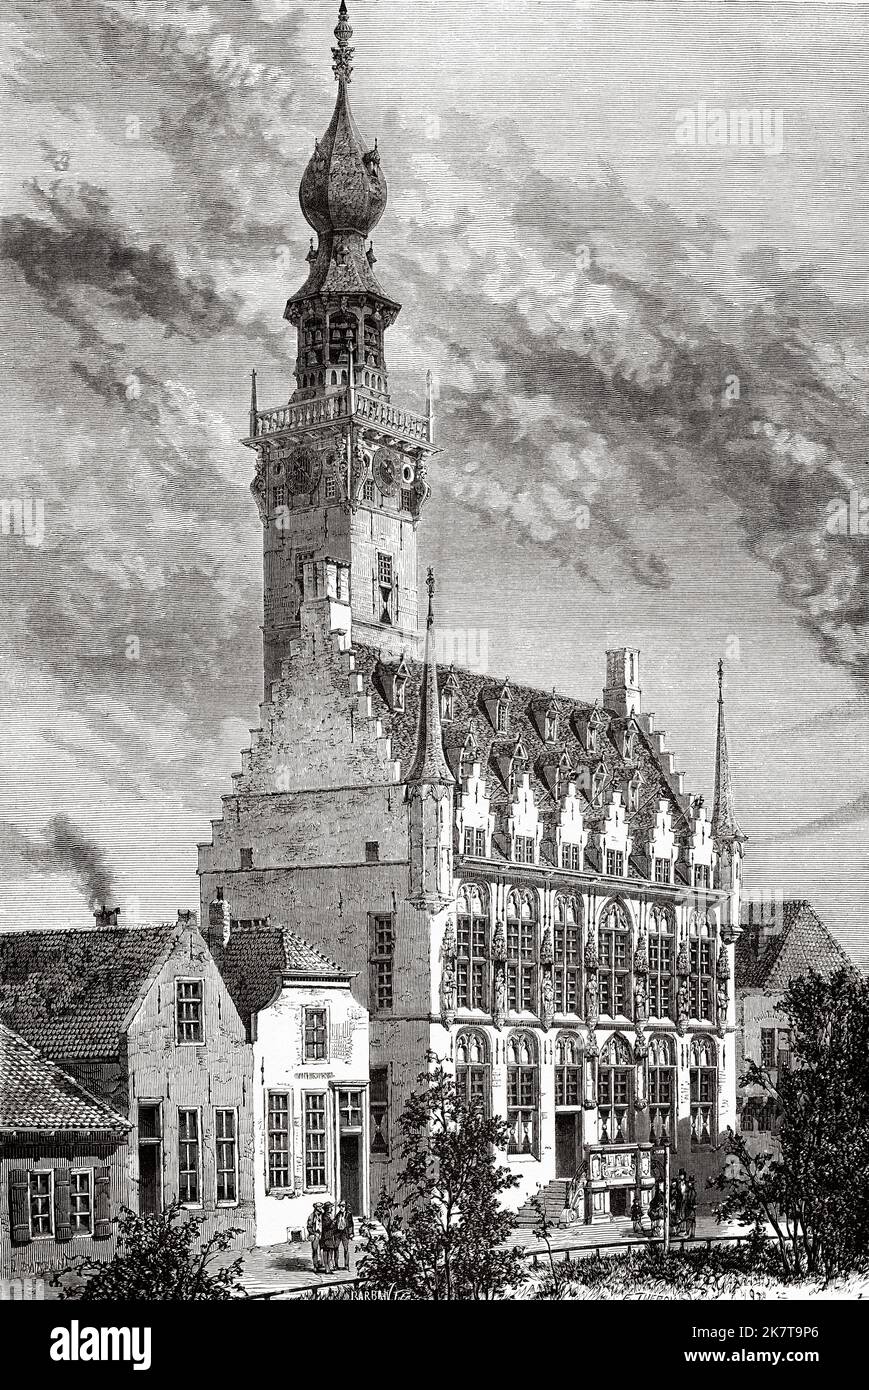 Veere town hall. Netherlands, Europe. Trip to the Zeeland by Charles De Coster 1873 Stock Photo